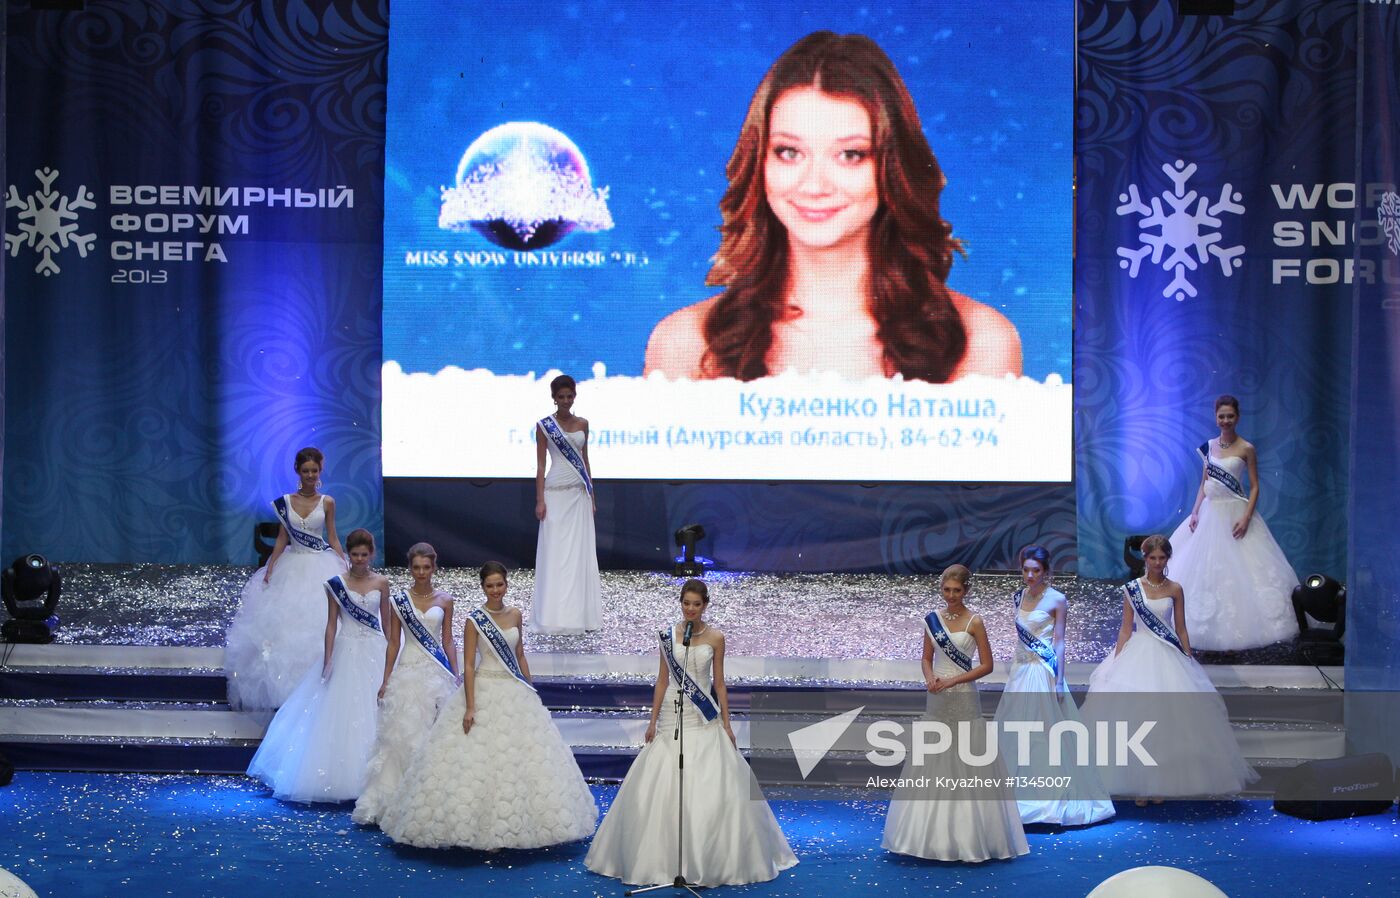 Final of "Miss Snow Universe" beauty contest